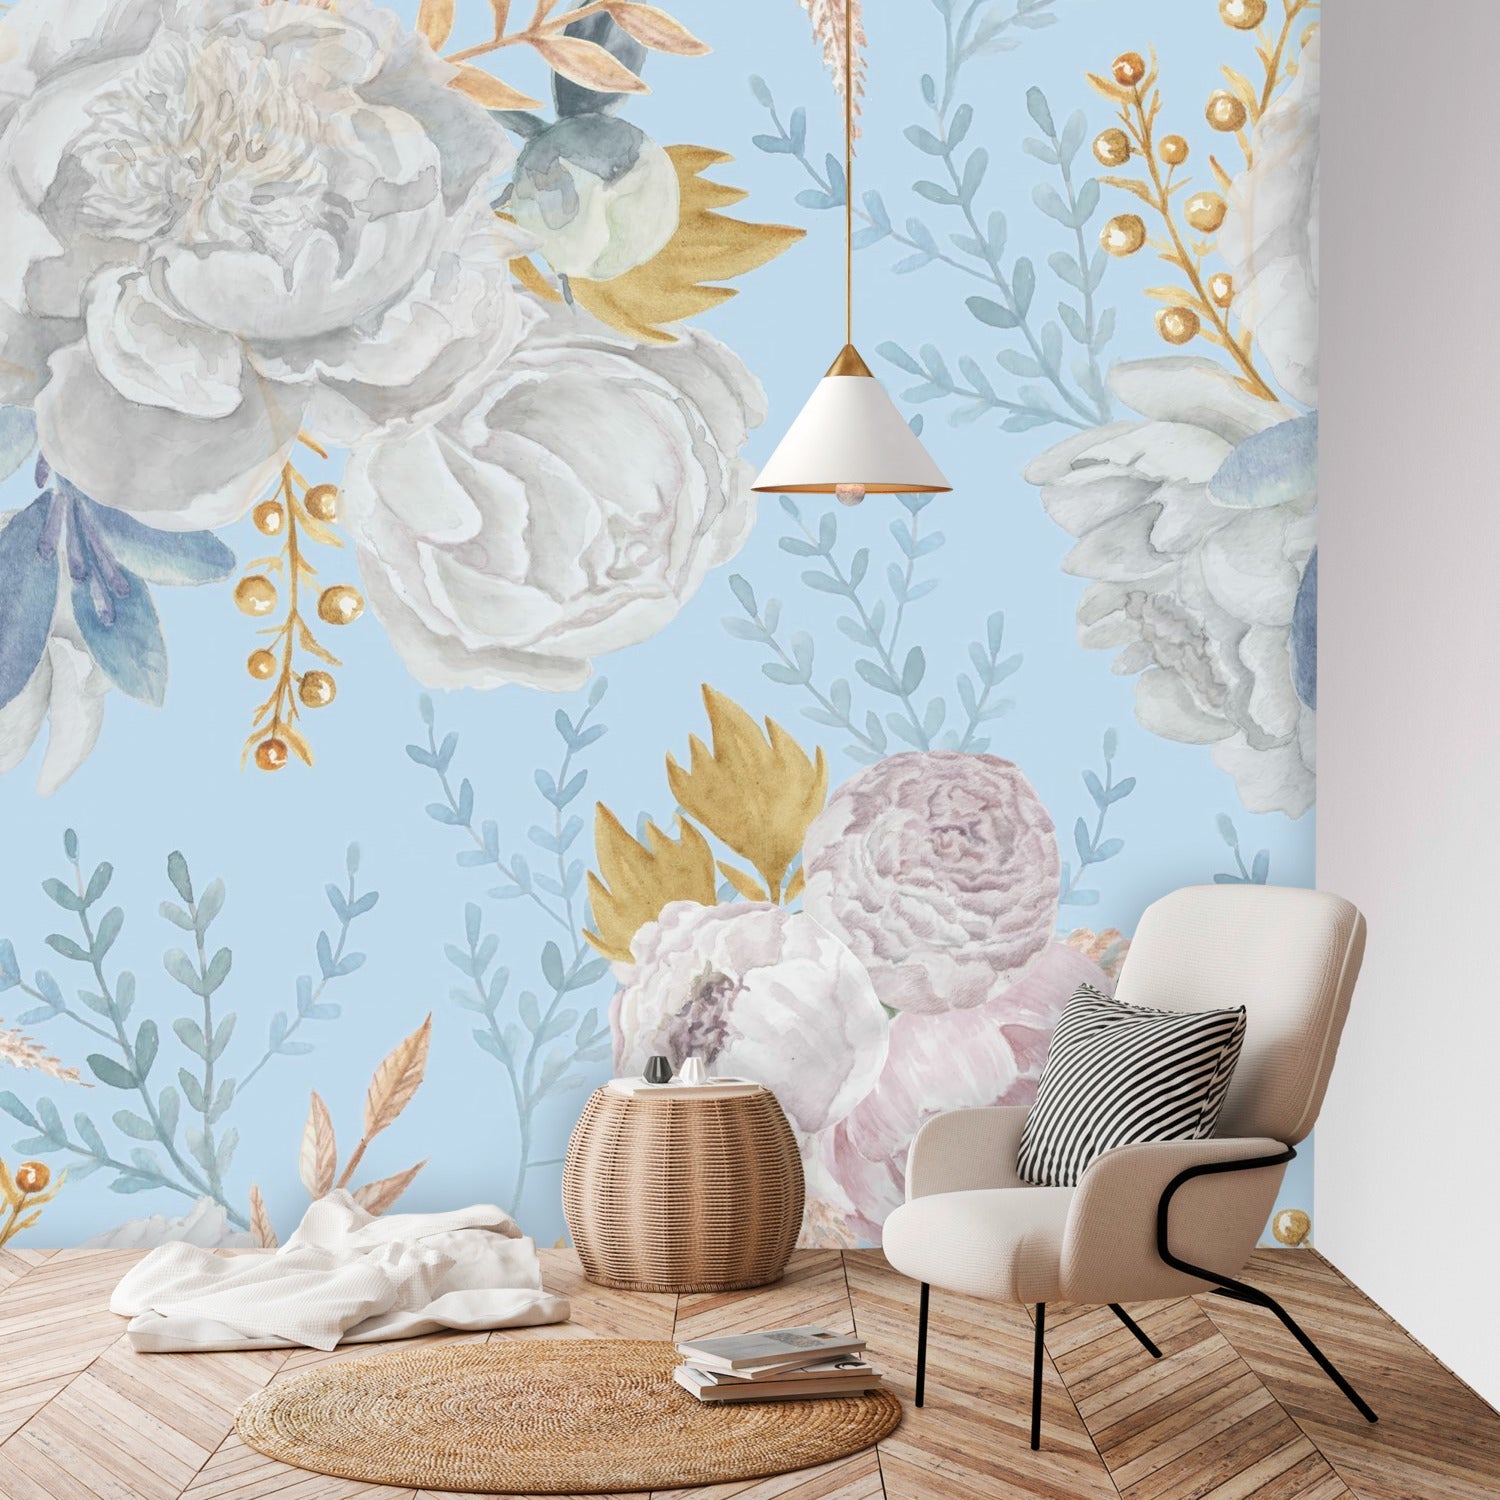 Kate McEnroe New York Pastel Blue And White Peony Floral Wall MuralWall Mural119298